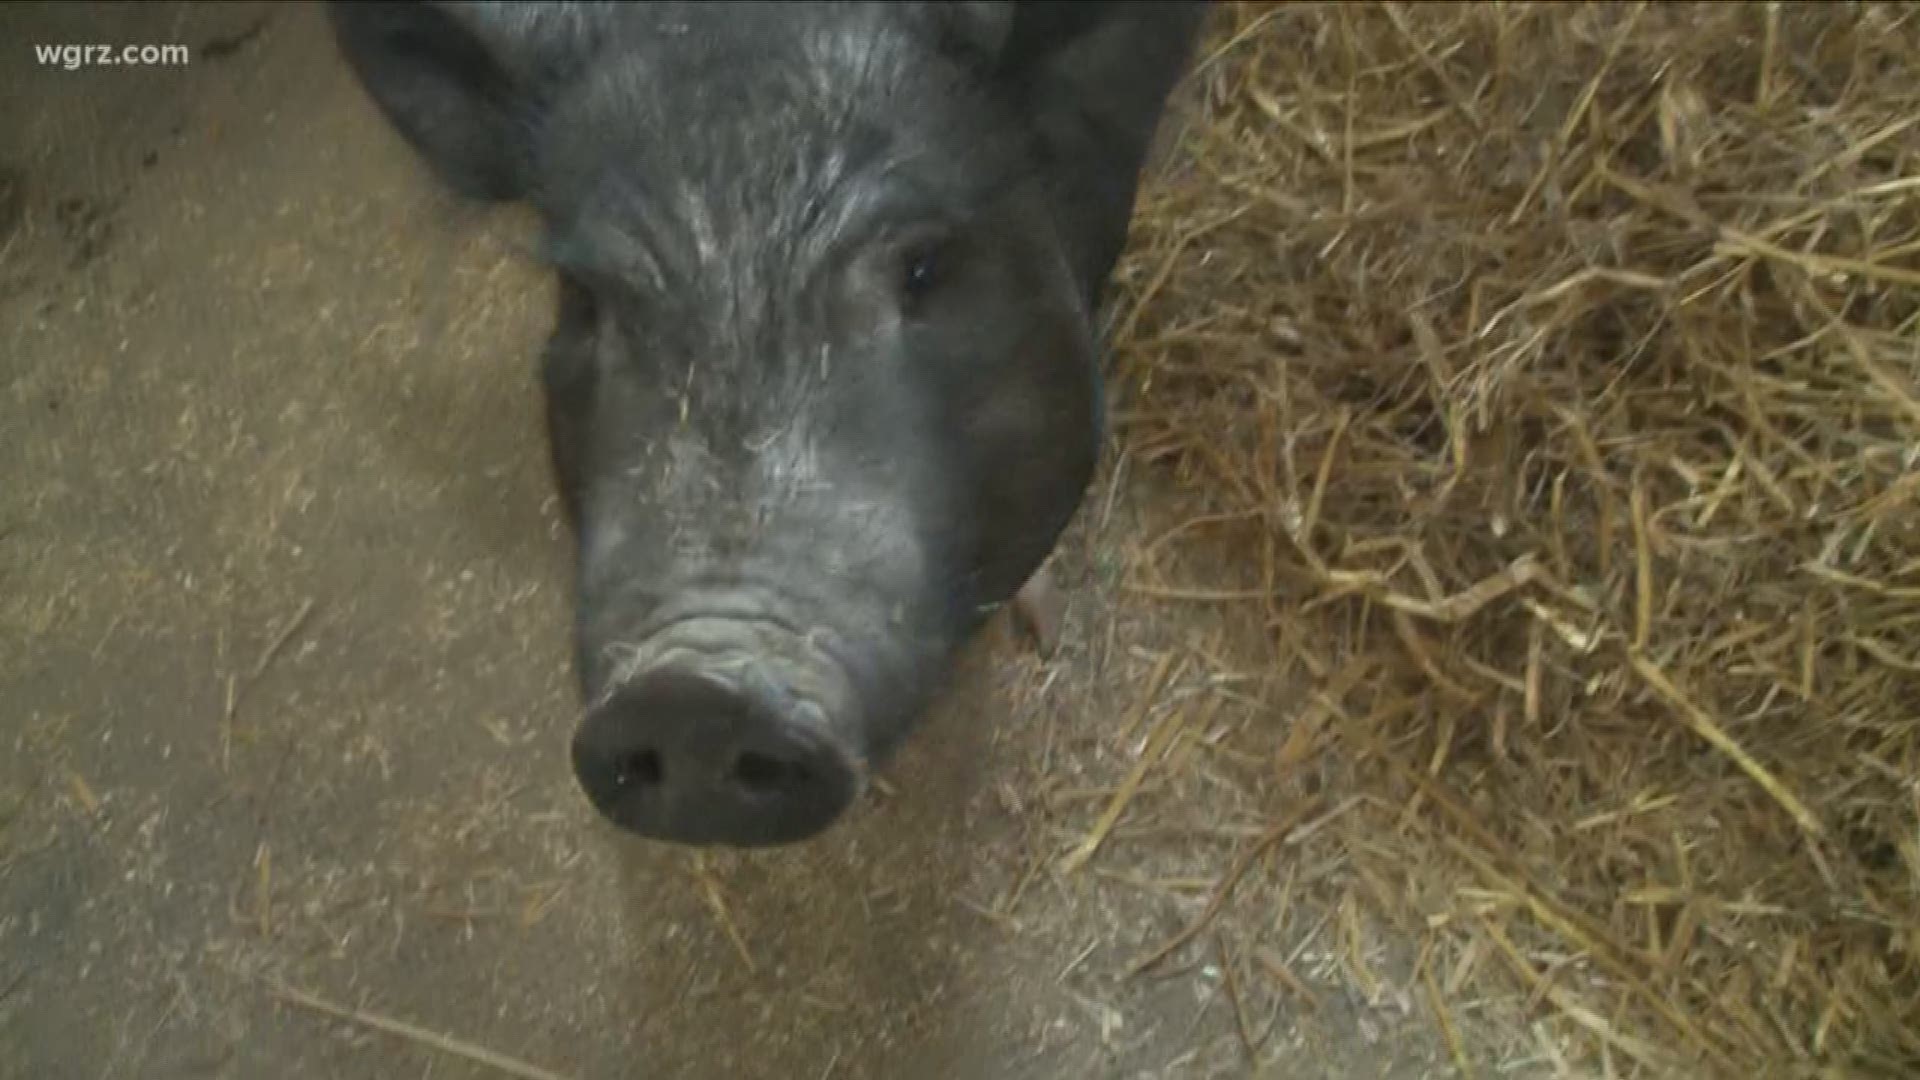 2 the Rescue: Ollie the Pig is looking for a good home at a local home.